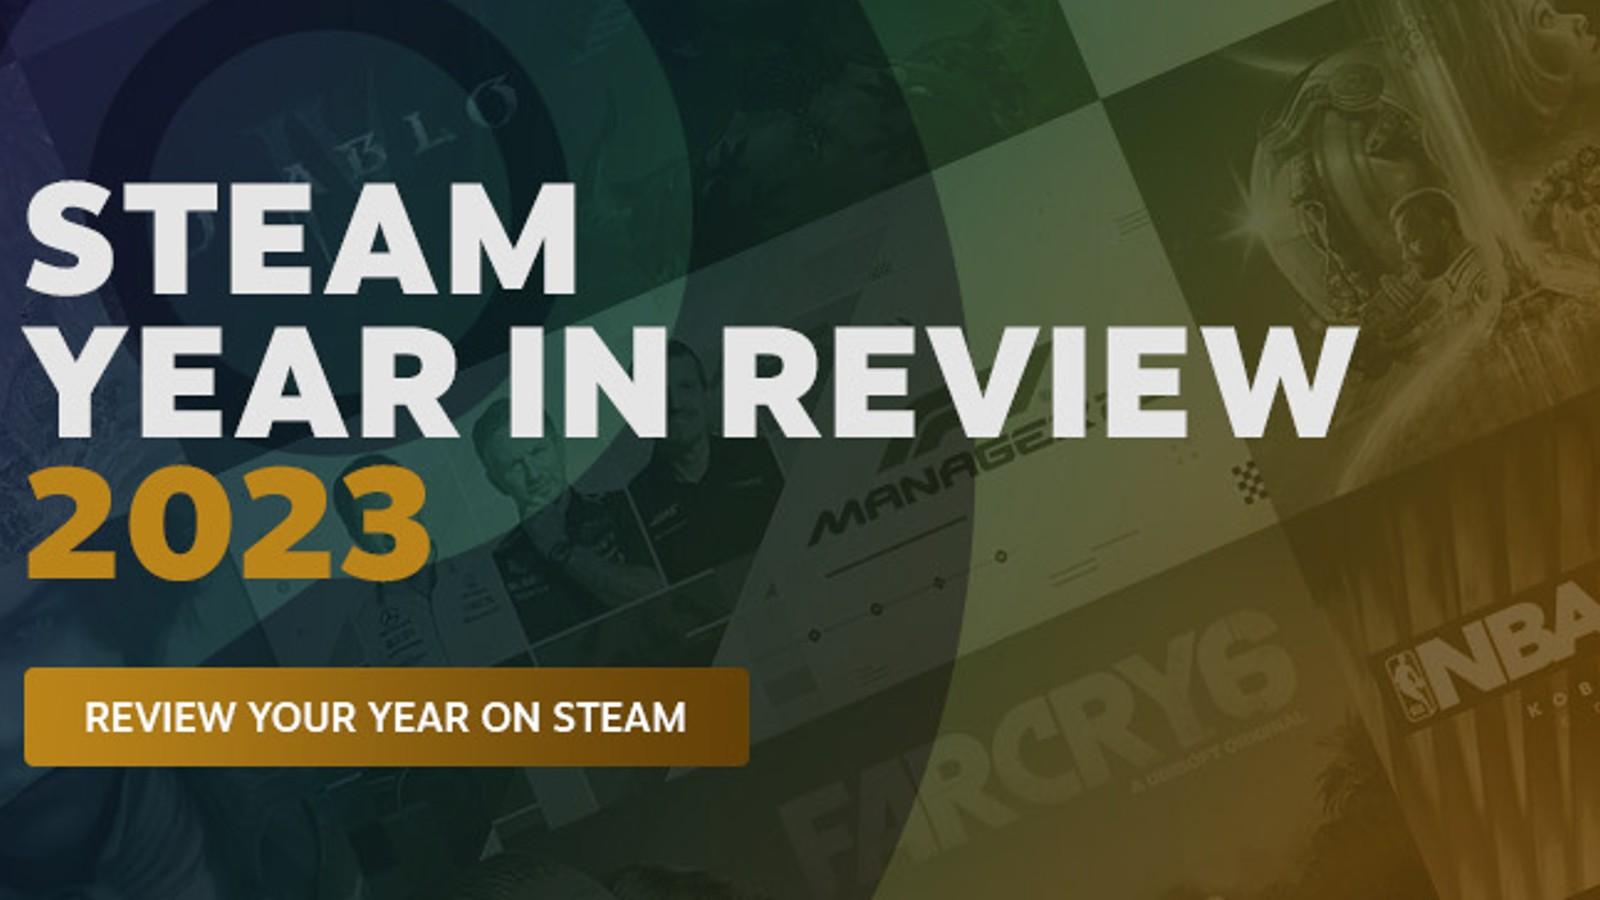 How to get your Steam Year in Review 2023 Dexerto